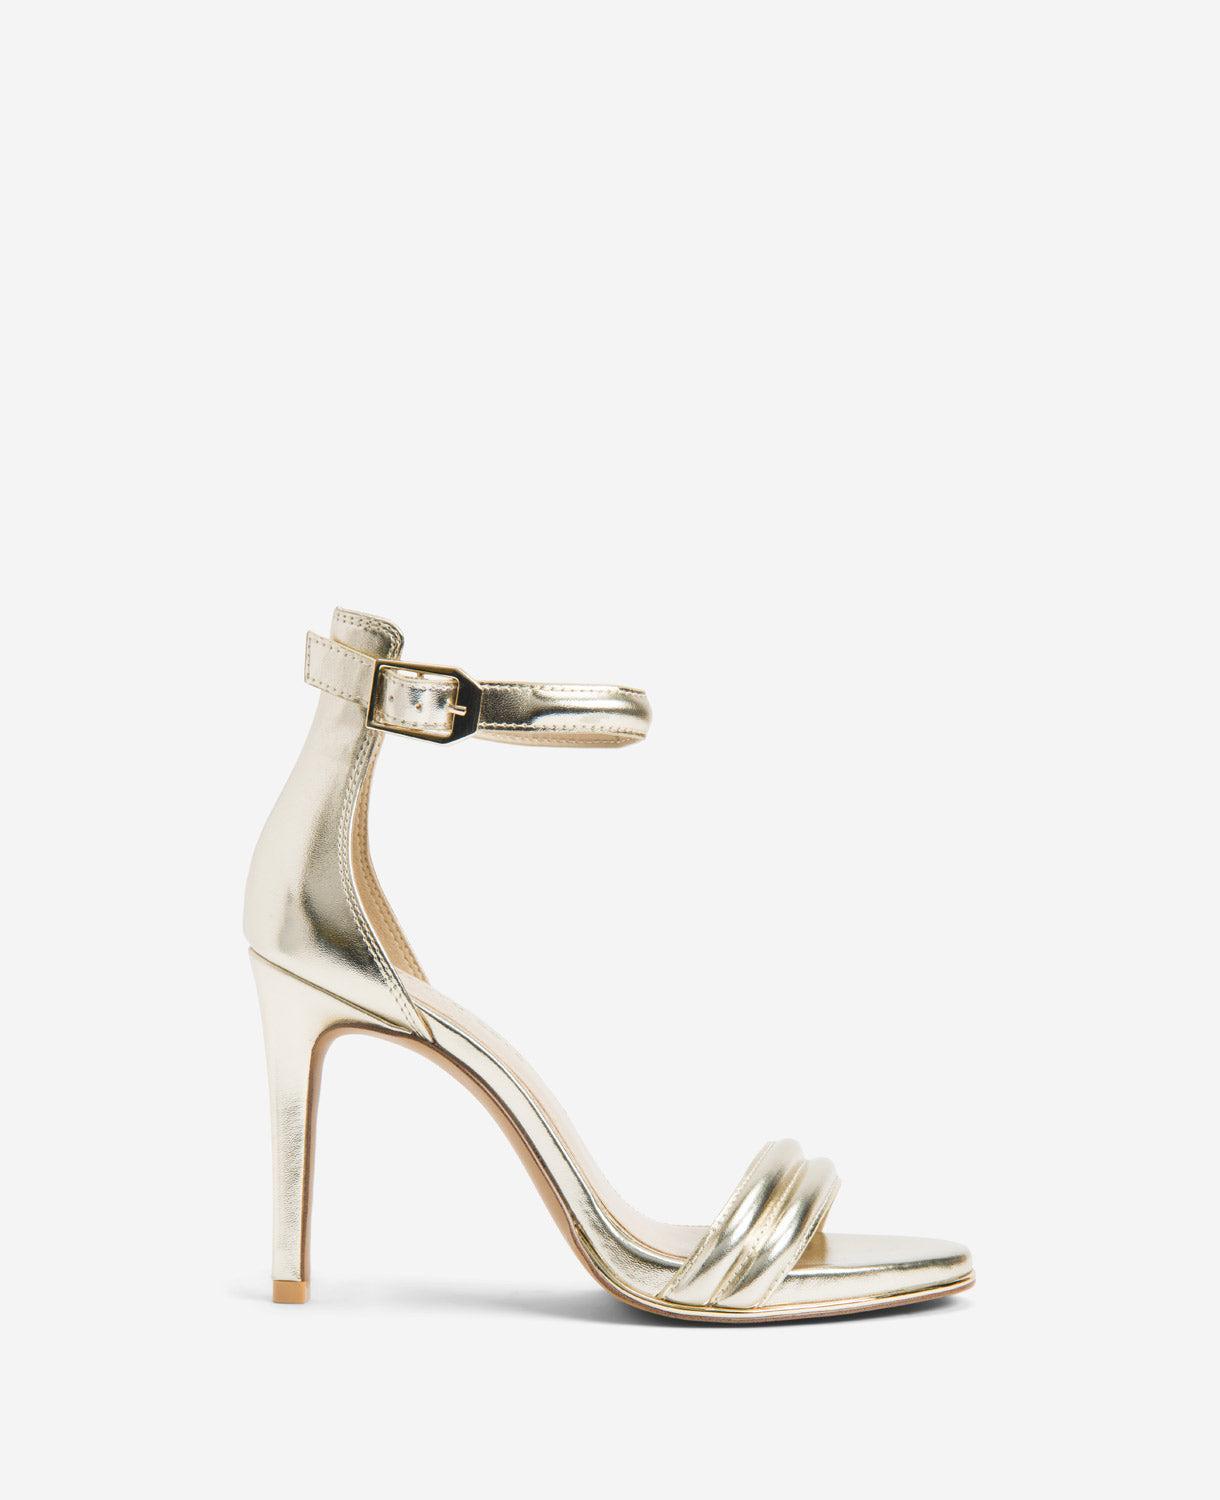 Kenneth Cole Womens Brooke Ankle Strap High Heel Sandals Product Image